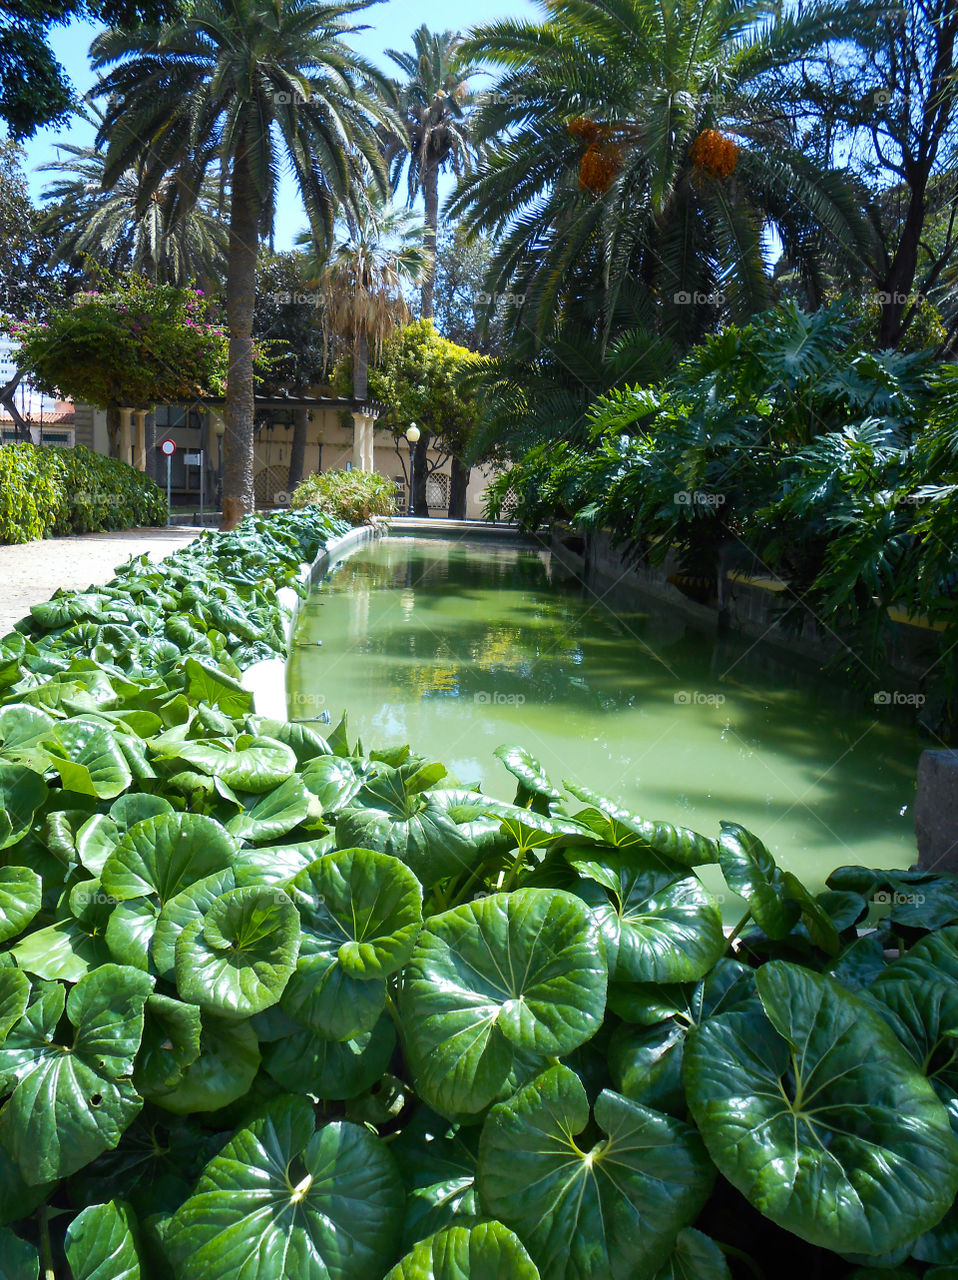 Green and lush vegetation surrounding a pond